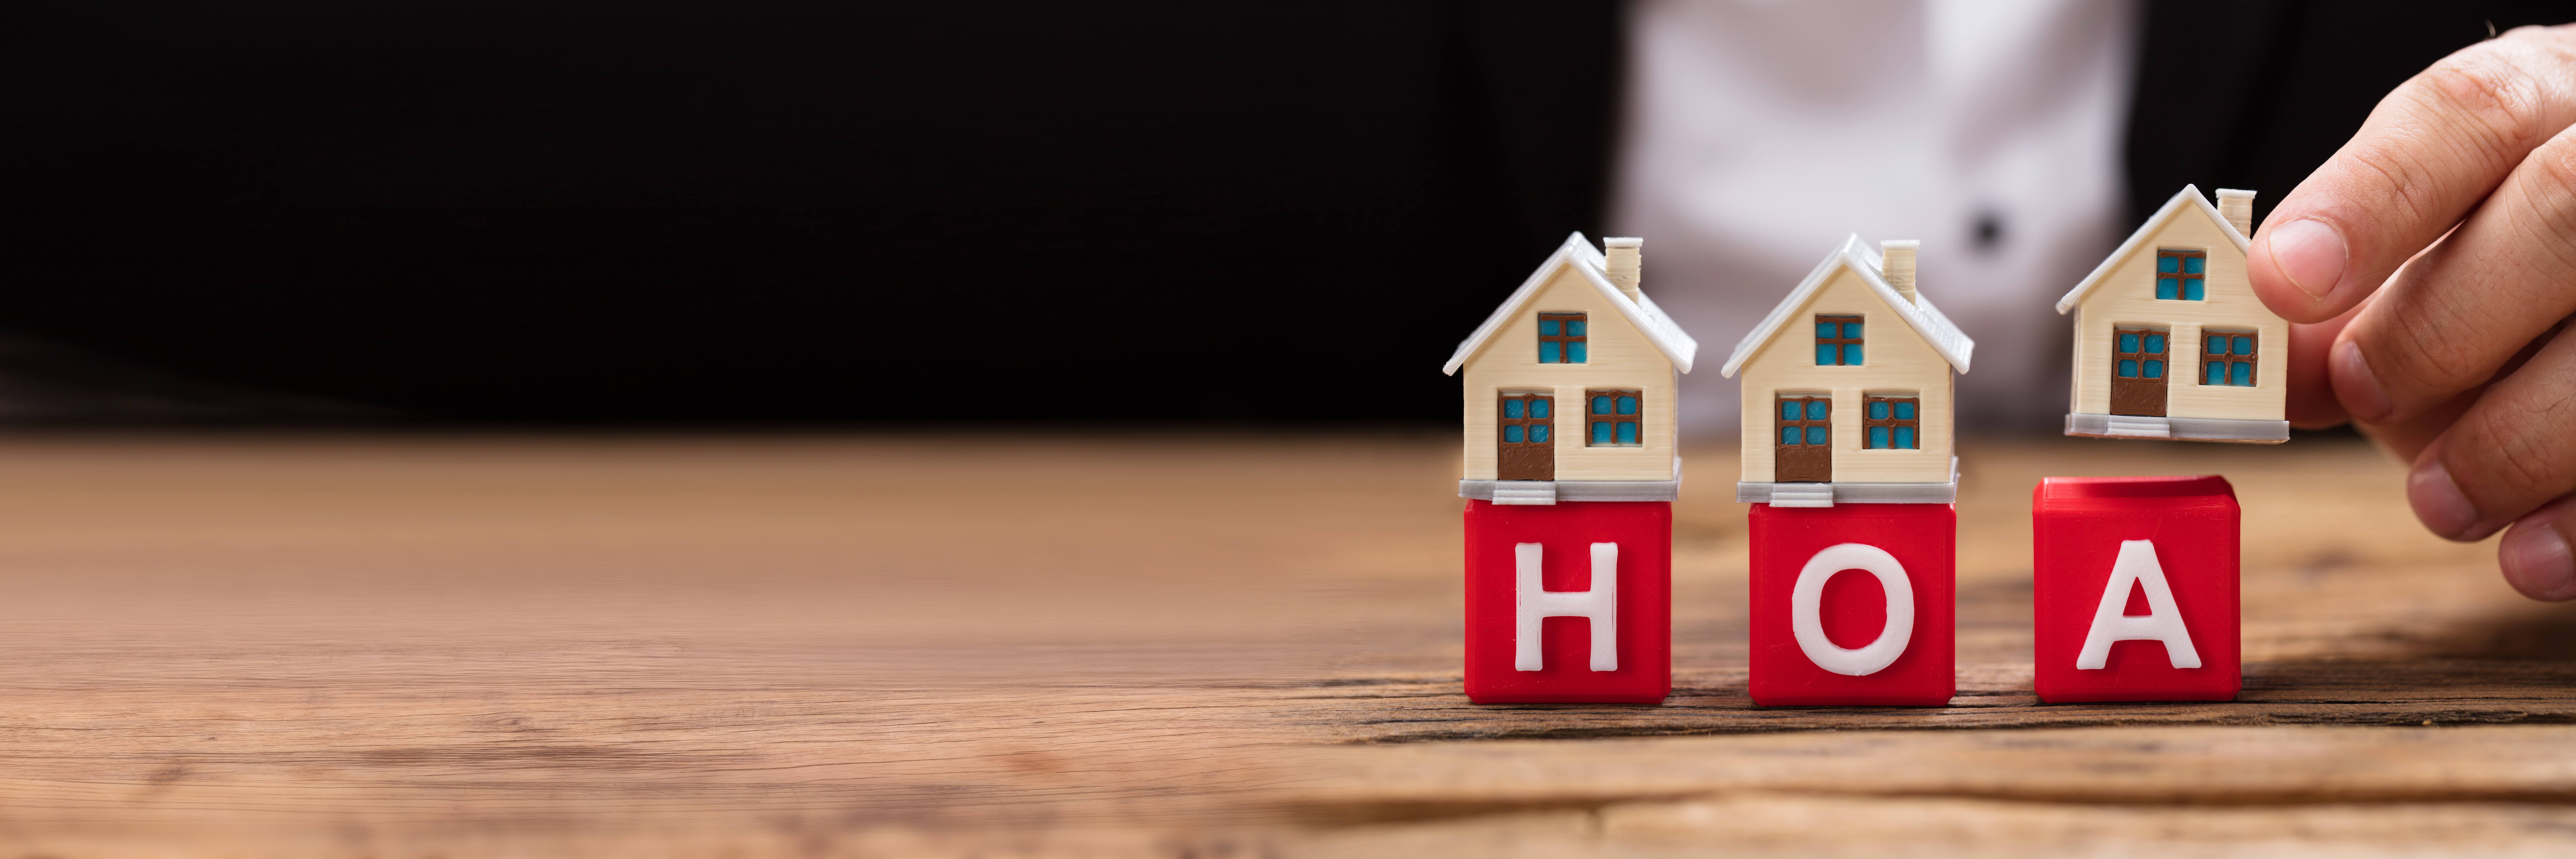 HOA spelled out in block letters with little houses on top signifying a homeowners association